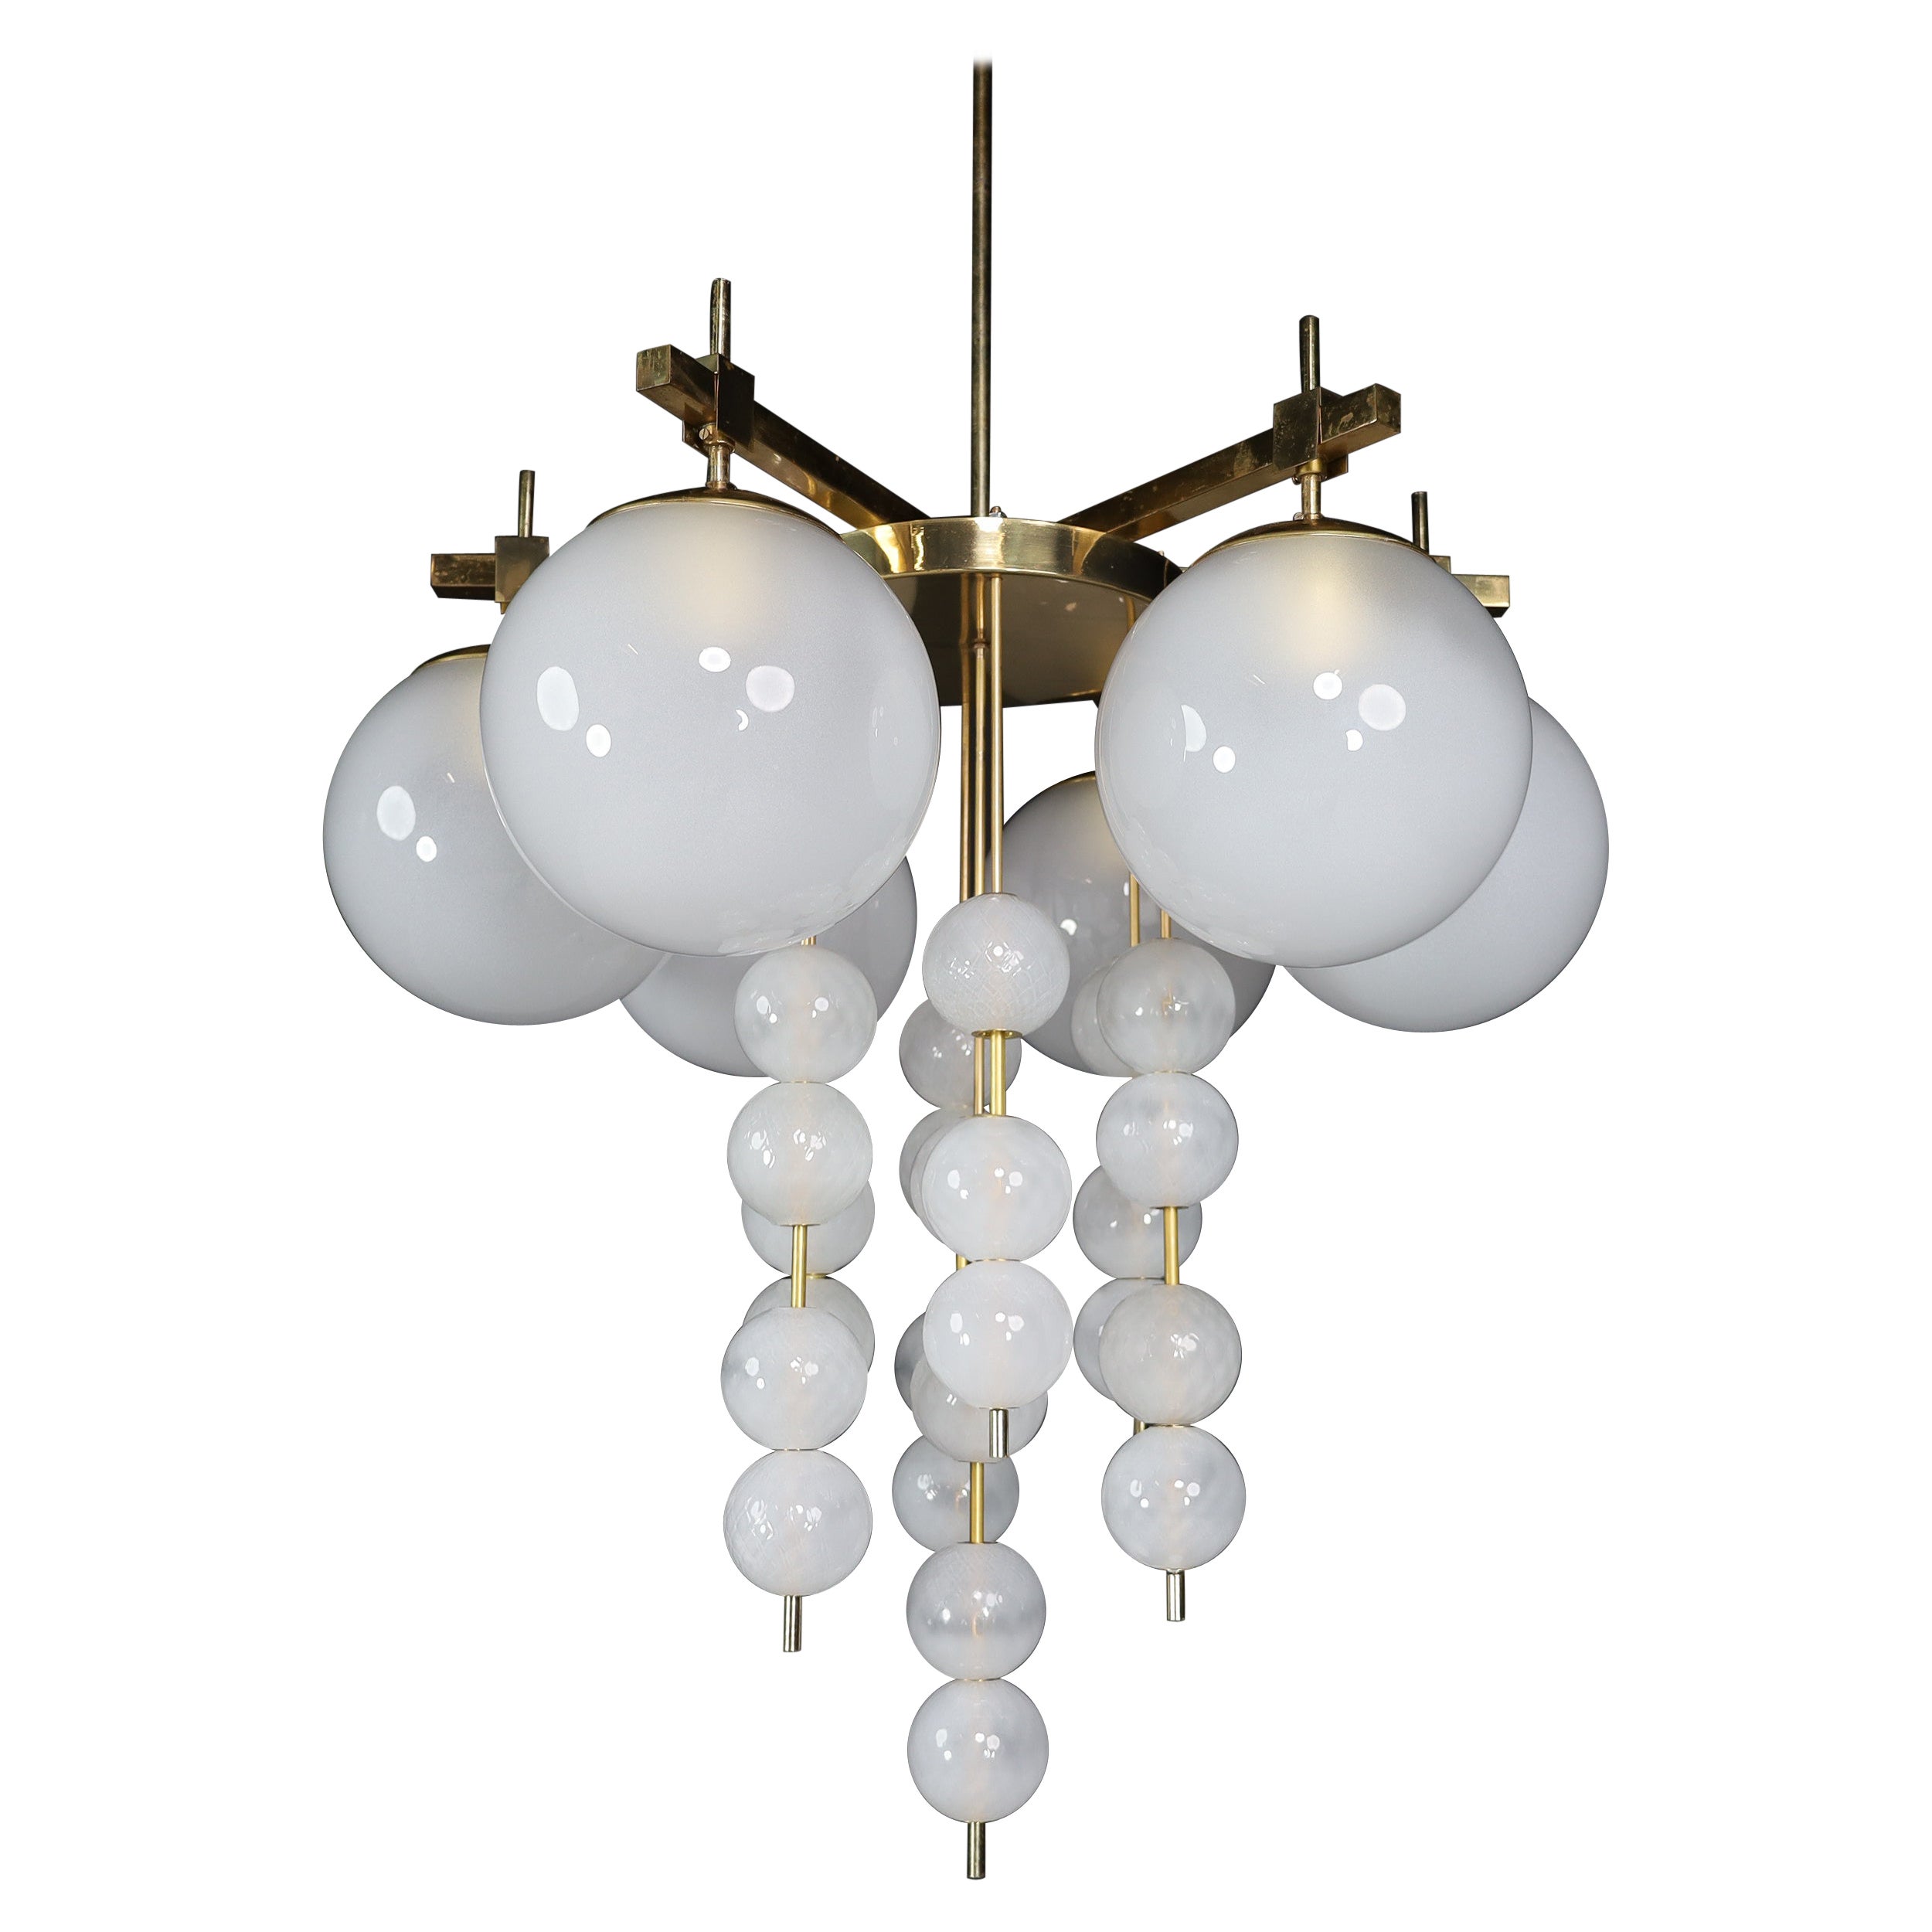 Brass Chandelier with Frosted Glass Globes, Czechia 1950s For Sale